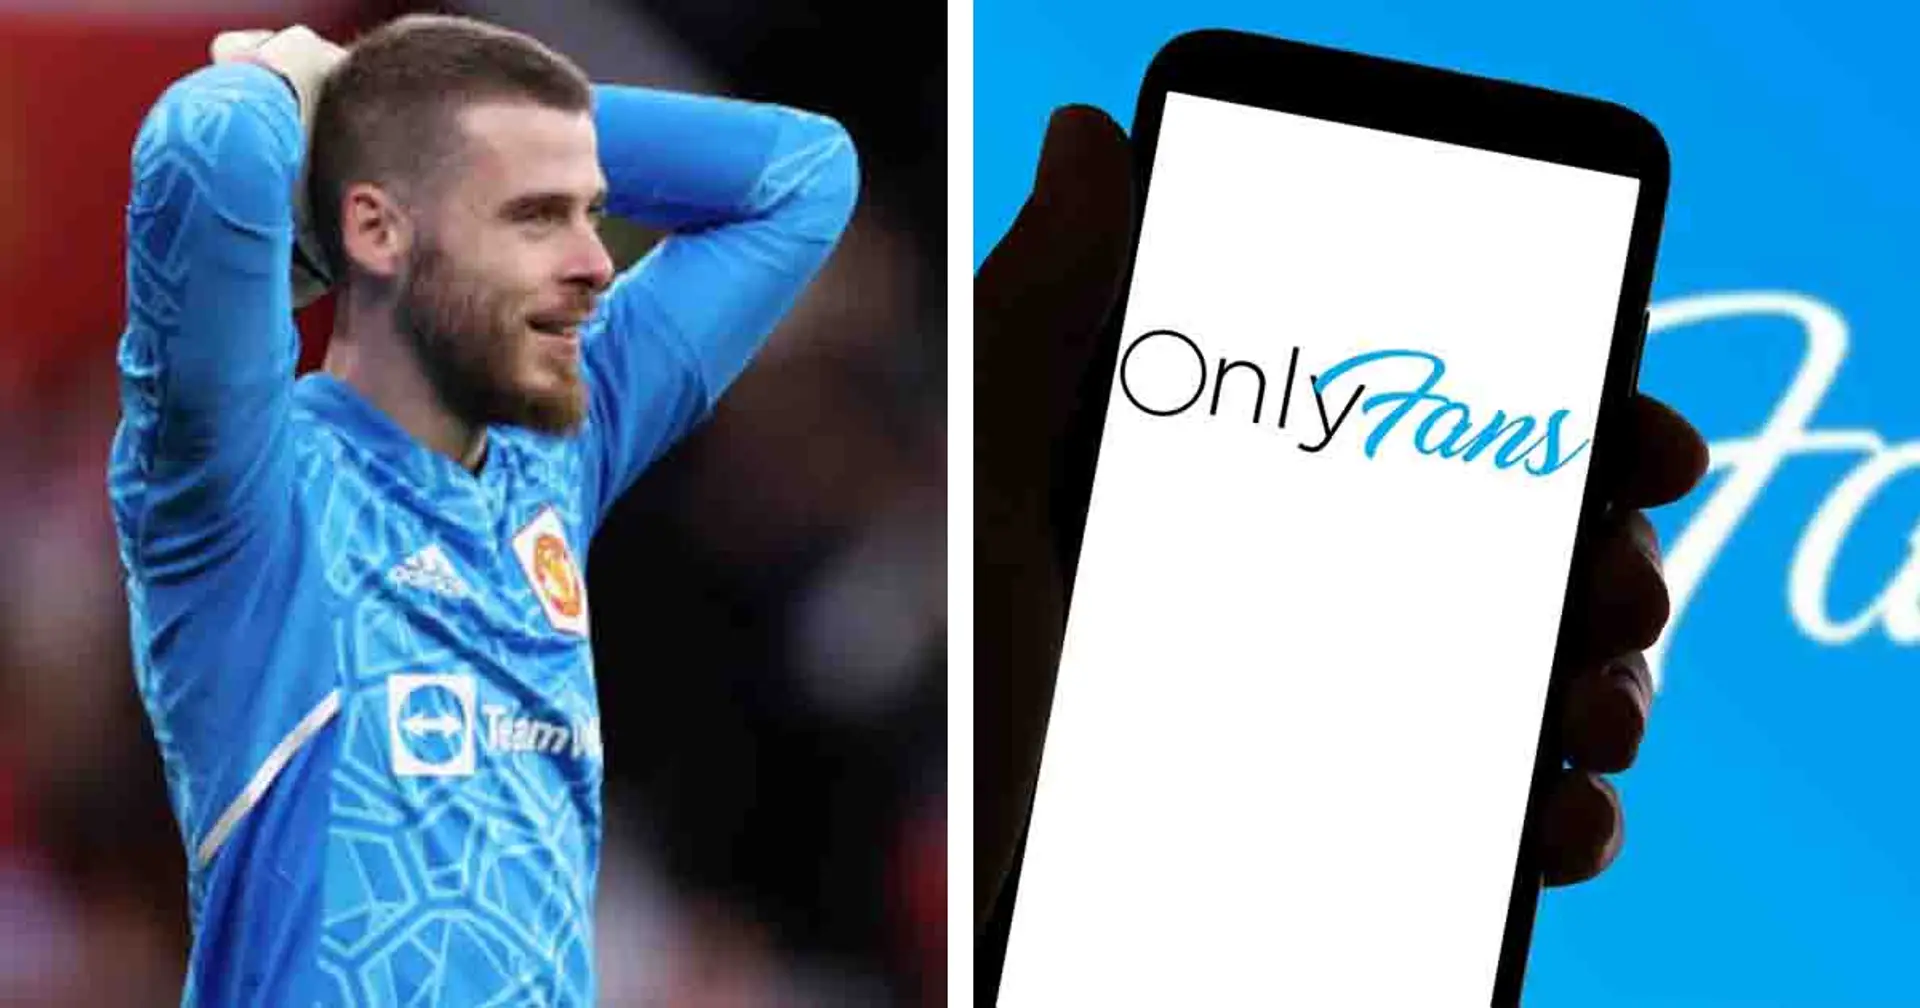 'Wasting my time': De Gea responds to claims he could make huge money as OnlyFans model